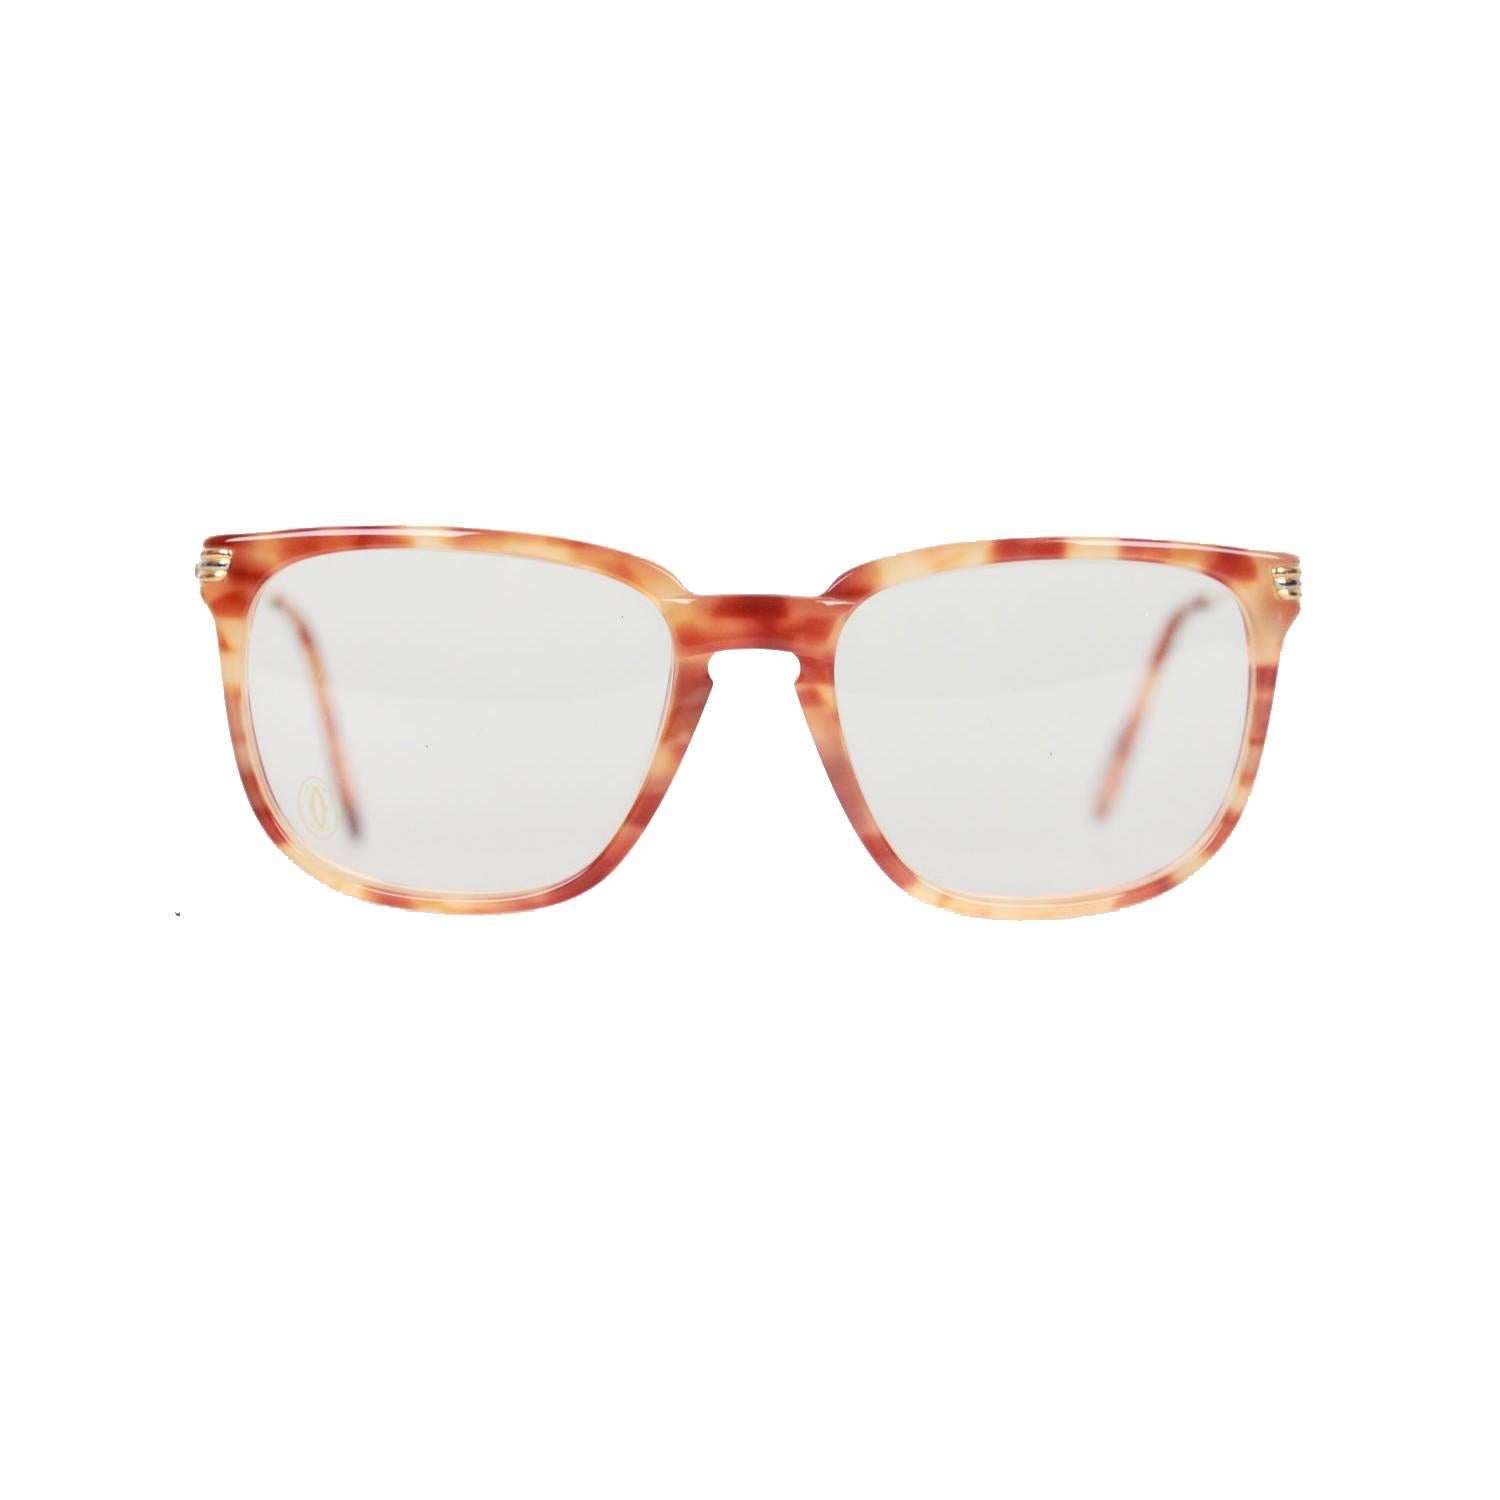 - Precious Cartier glasses of the 90s, rimmed eyeglass
- Light tortoise and gold metal frame
- Model: LUMEN - Ref numbers: 1760086
- Expressive design & discreet frame coloring
- Original Cartier clear demo lenses (with embossed logo on right